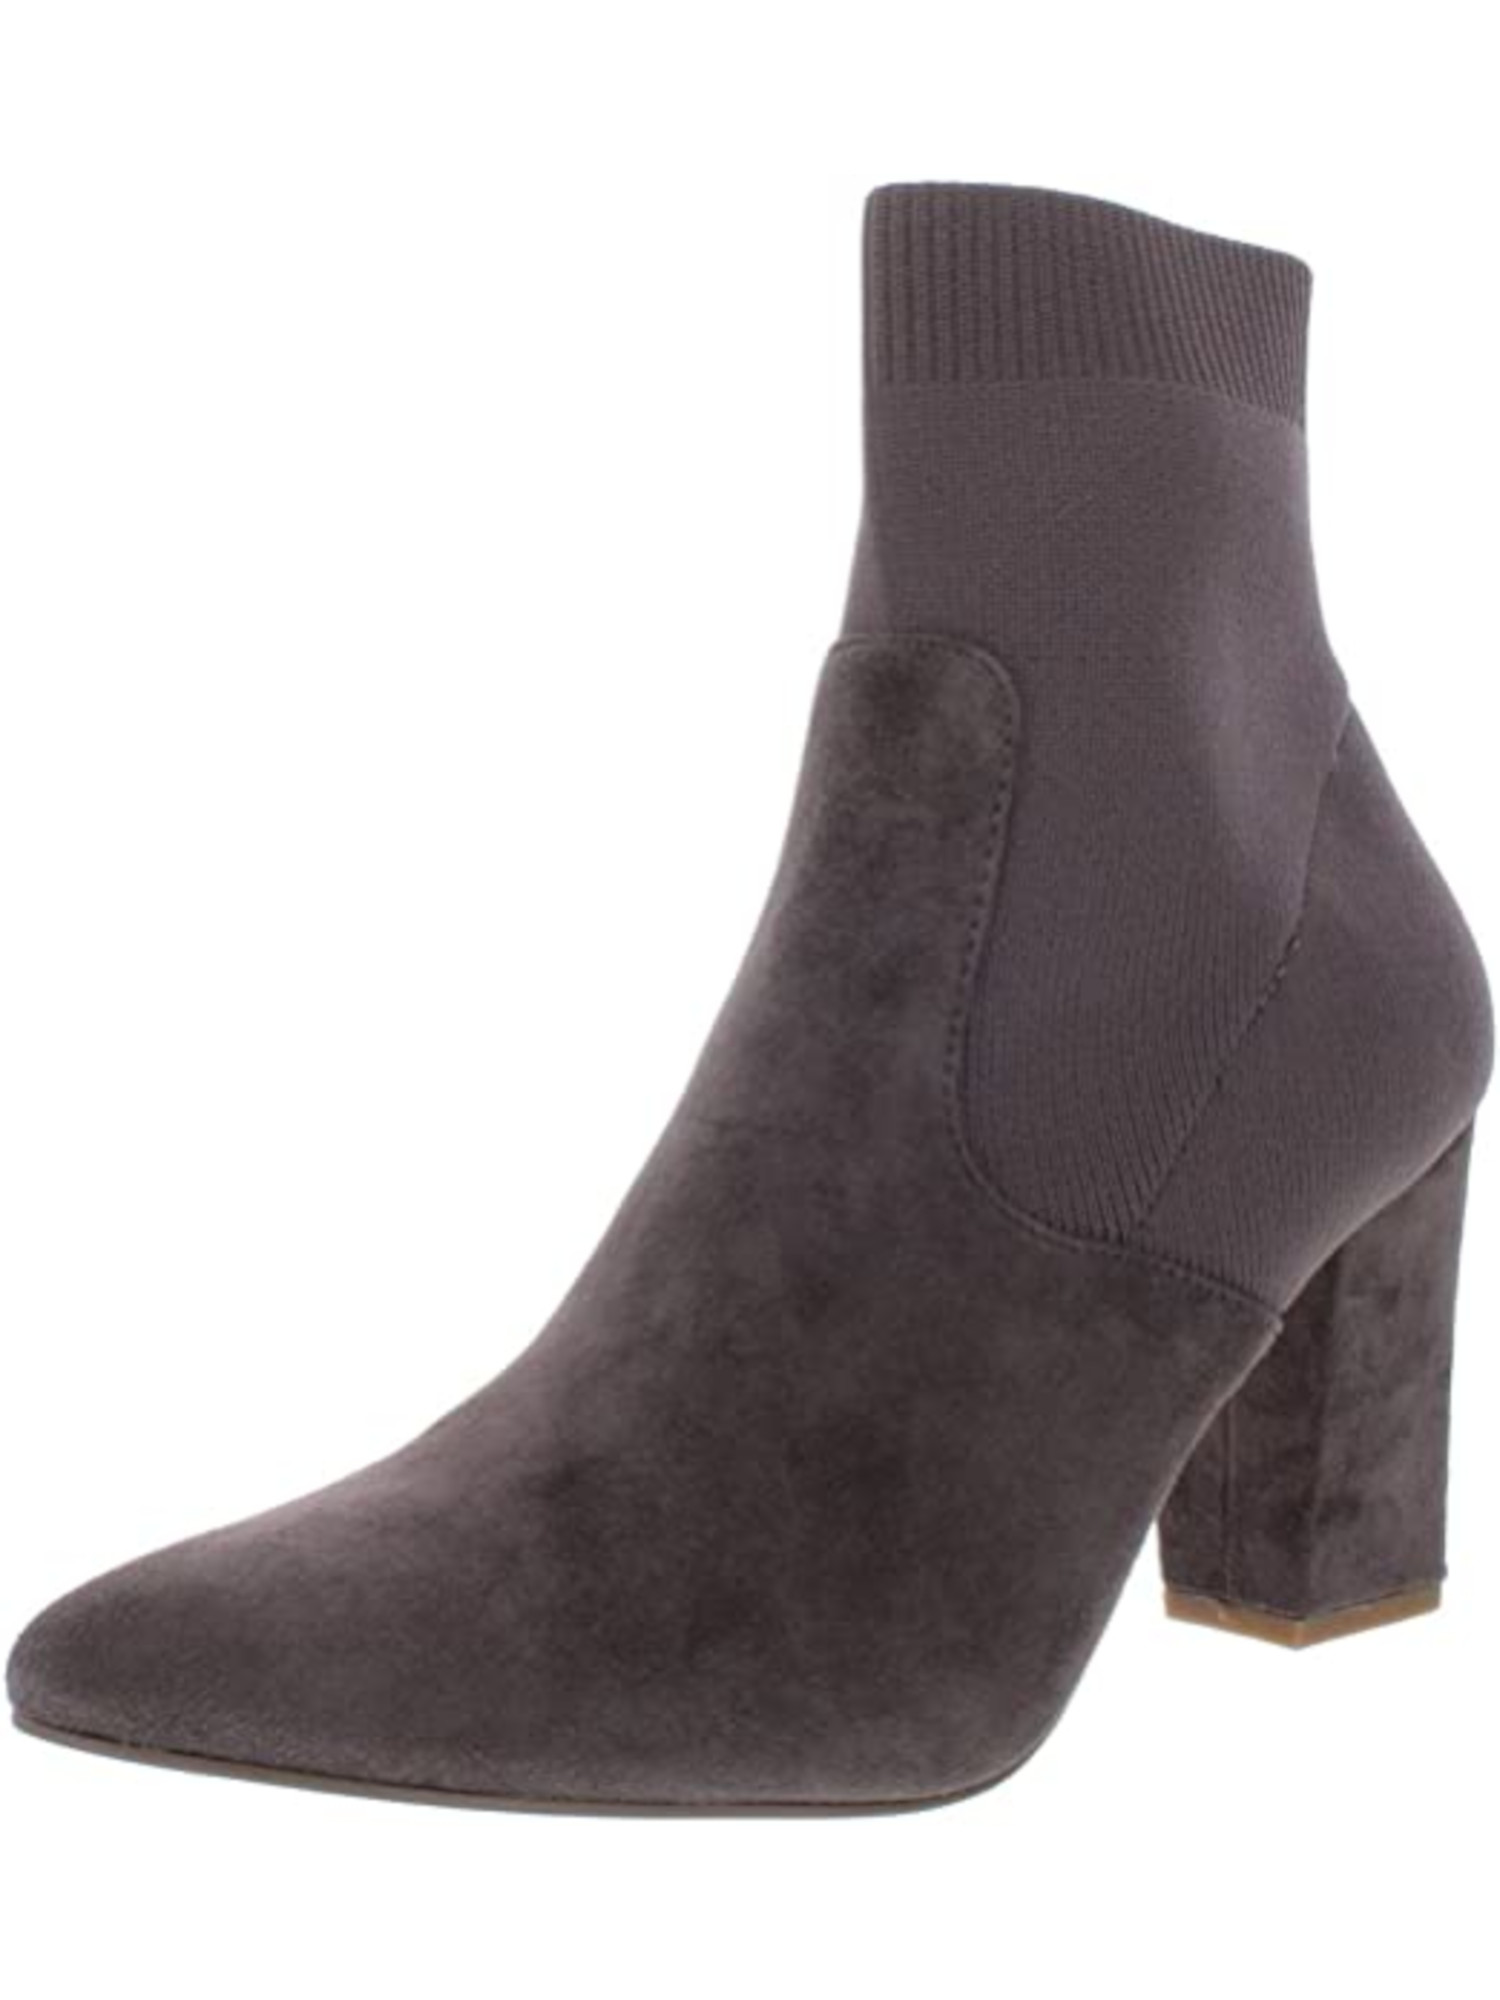 STEVE MADDEN Womens Gray Sock Ankle Bootie Comfort Stretch Remy Pointed Toe Block Heel Slip On Booties 7 M